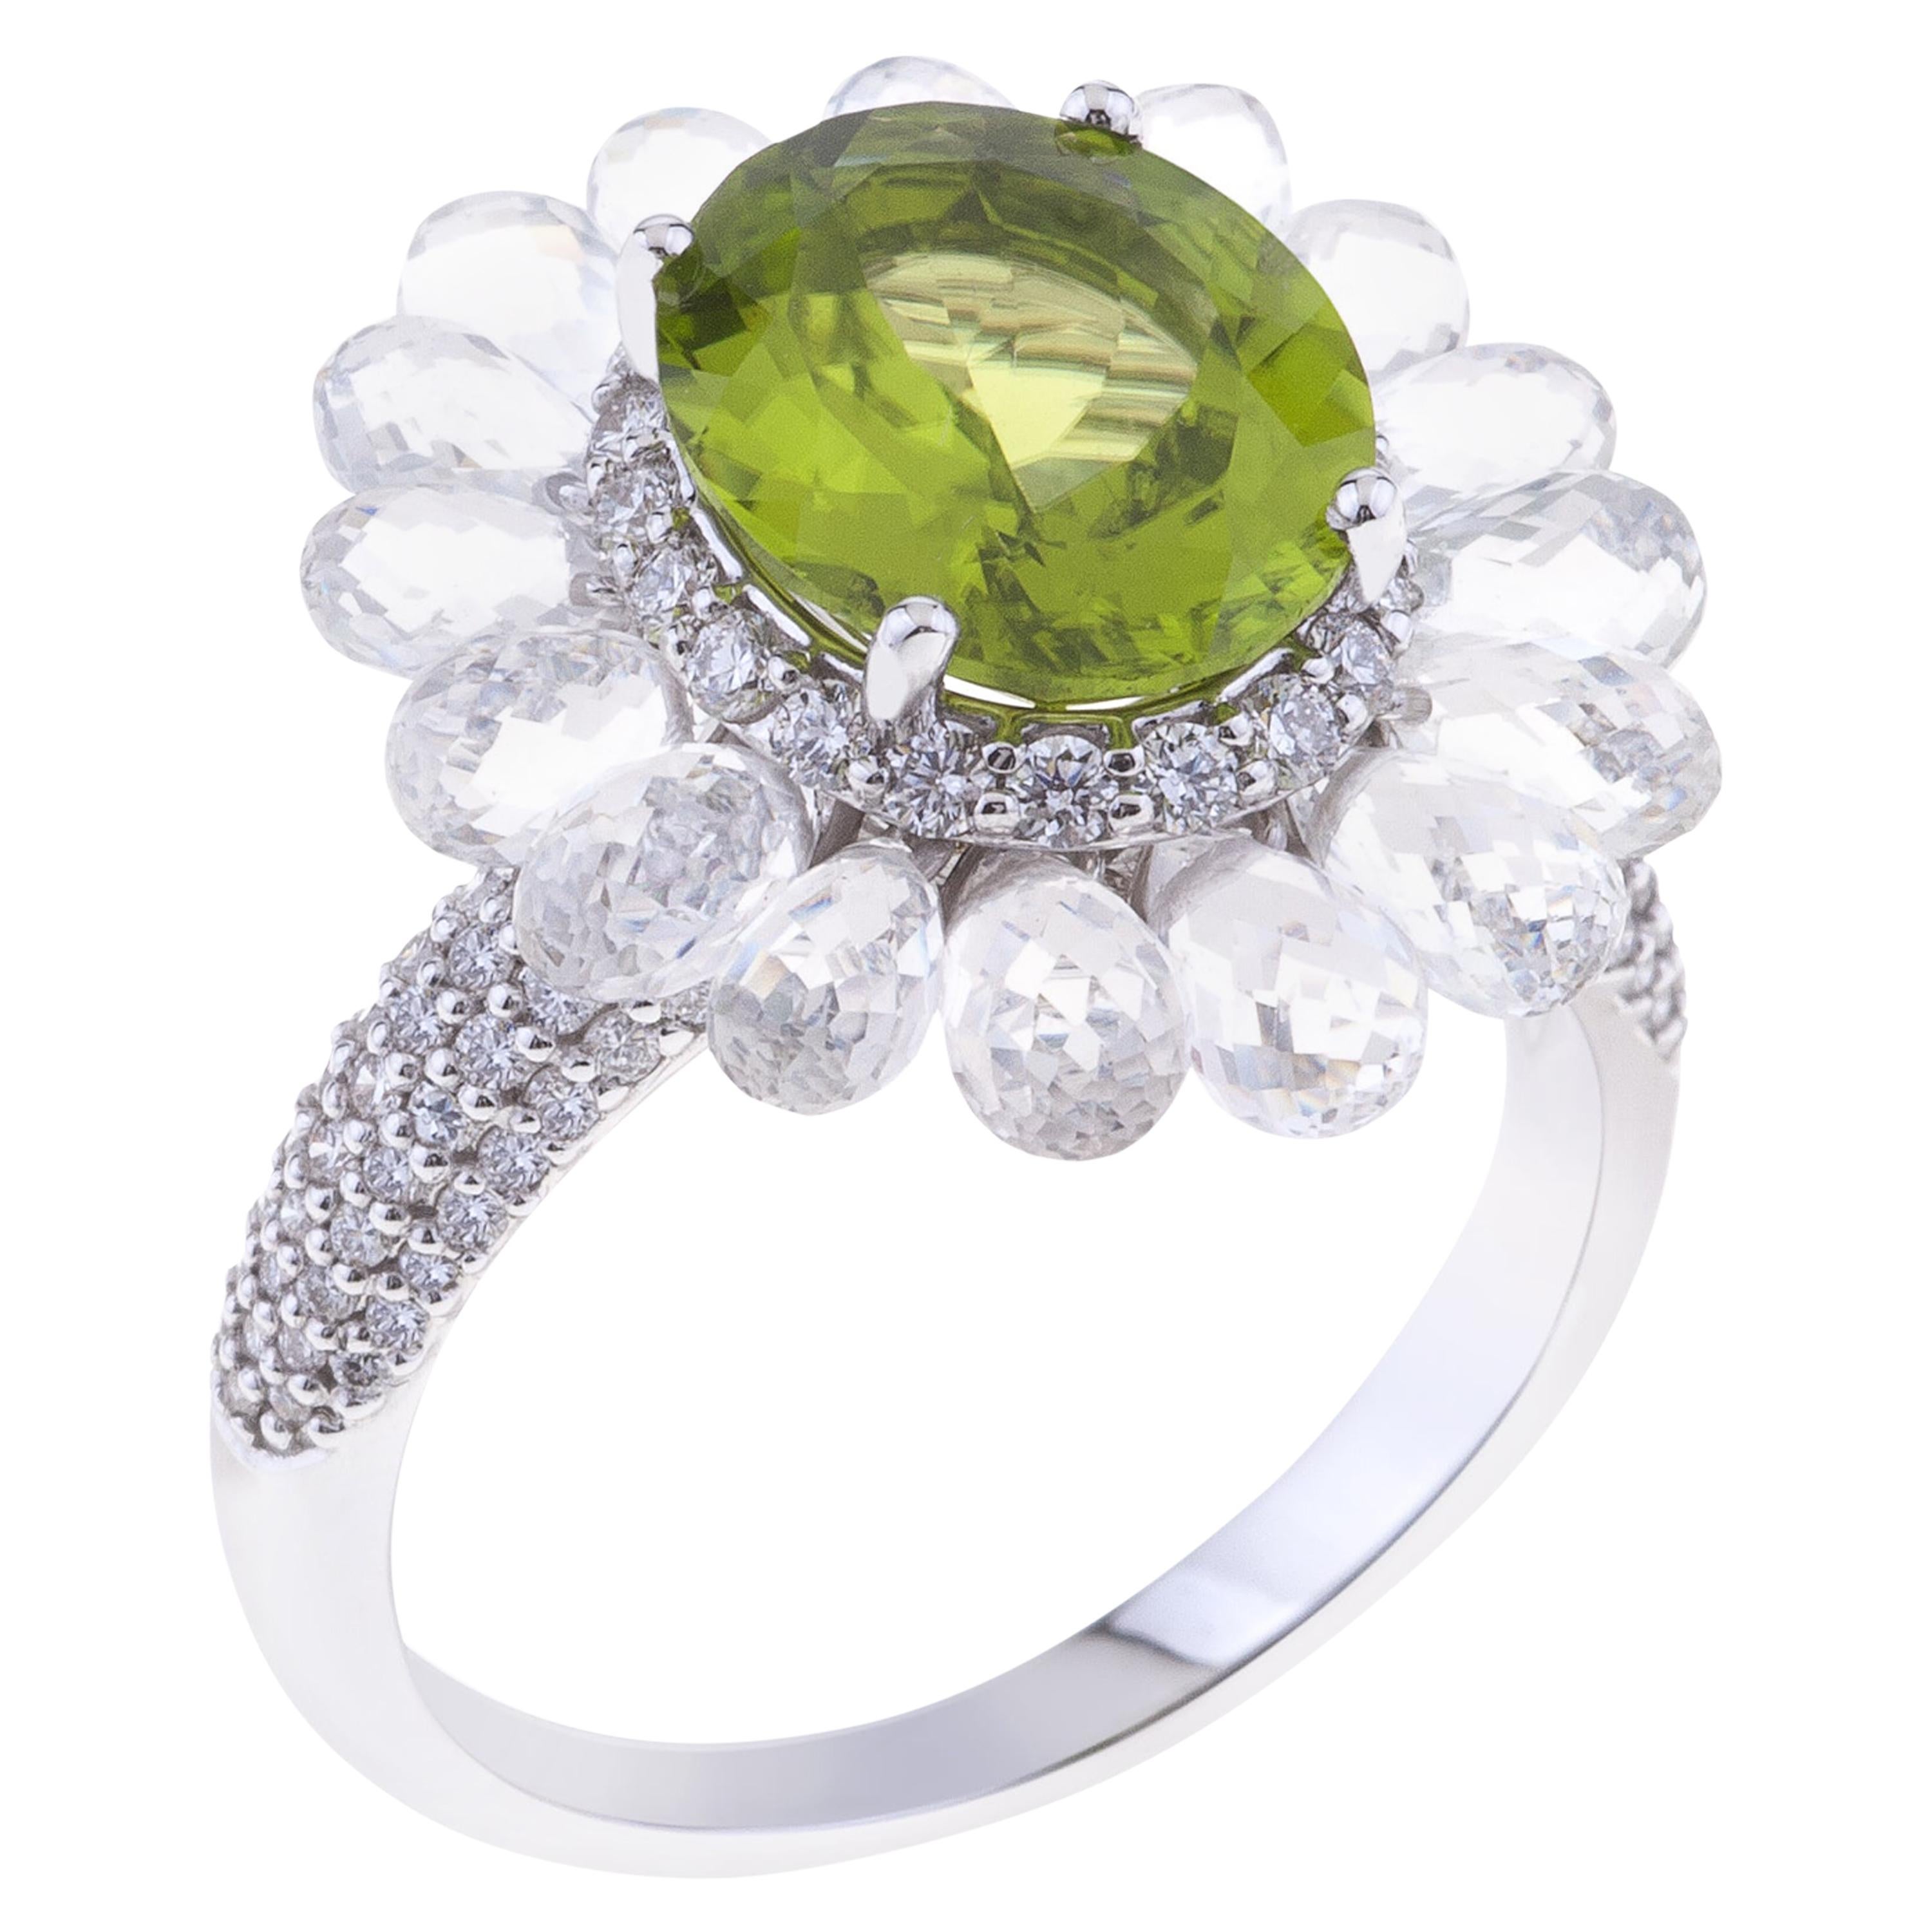 Flower Ring White Gold with Unique White Sapphires, Oval Peridot, Diamonds